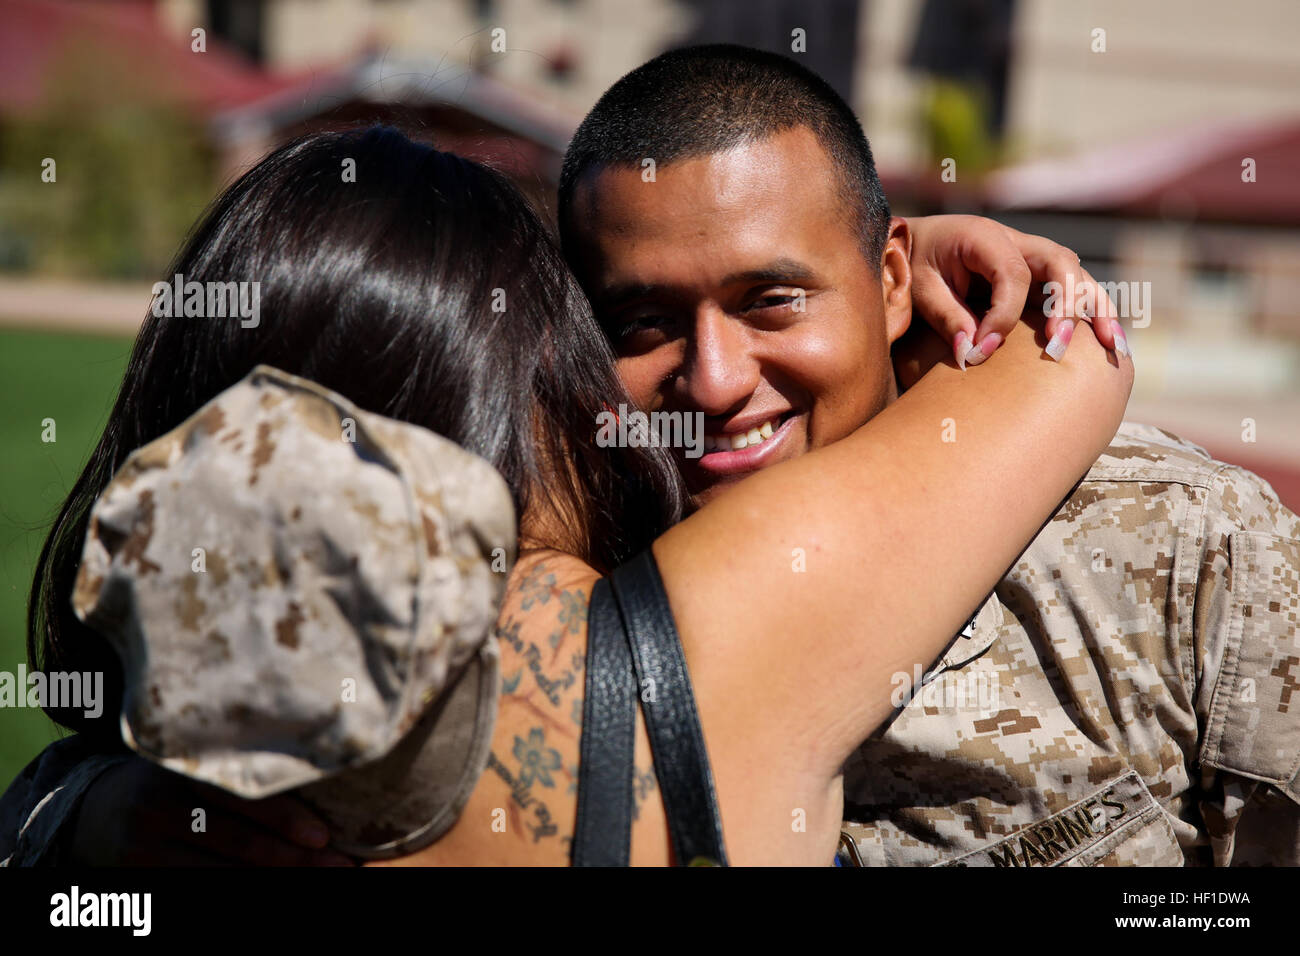 Sergeant Carlos Sanchez, engineer chief, Regimental Combat Team 7, and a native of Little Falls, N.J., embraces his wife Mercedes for the first time in nearly a year aboard Camp Margarita here, Aug. 7. The first main body of RCT-7 personnel returned to family and friends after being deployed approximately 10 months. The servicemembers worked with Afghan forces while deployed to Southwest Afghanistan. RCT-7 waves farewell to Afghanistan, returns home to hugs, kisses 130807-M-PC317-001 Stock Photo